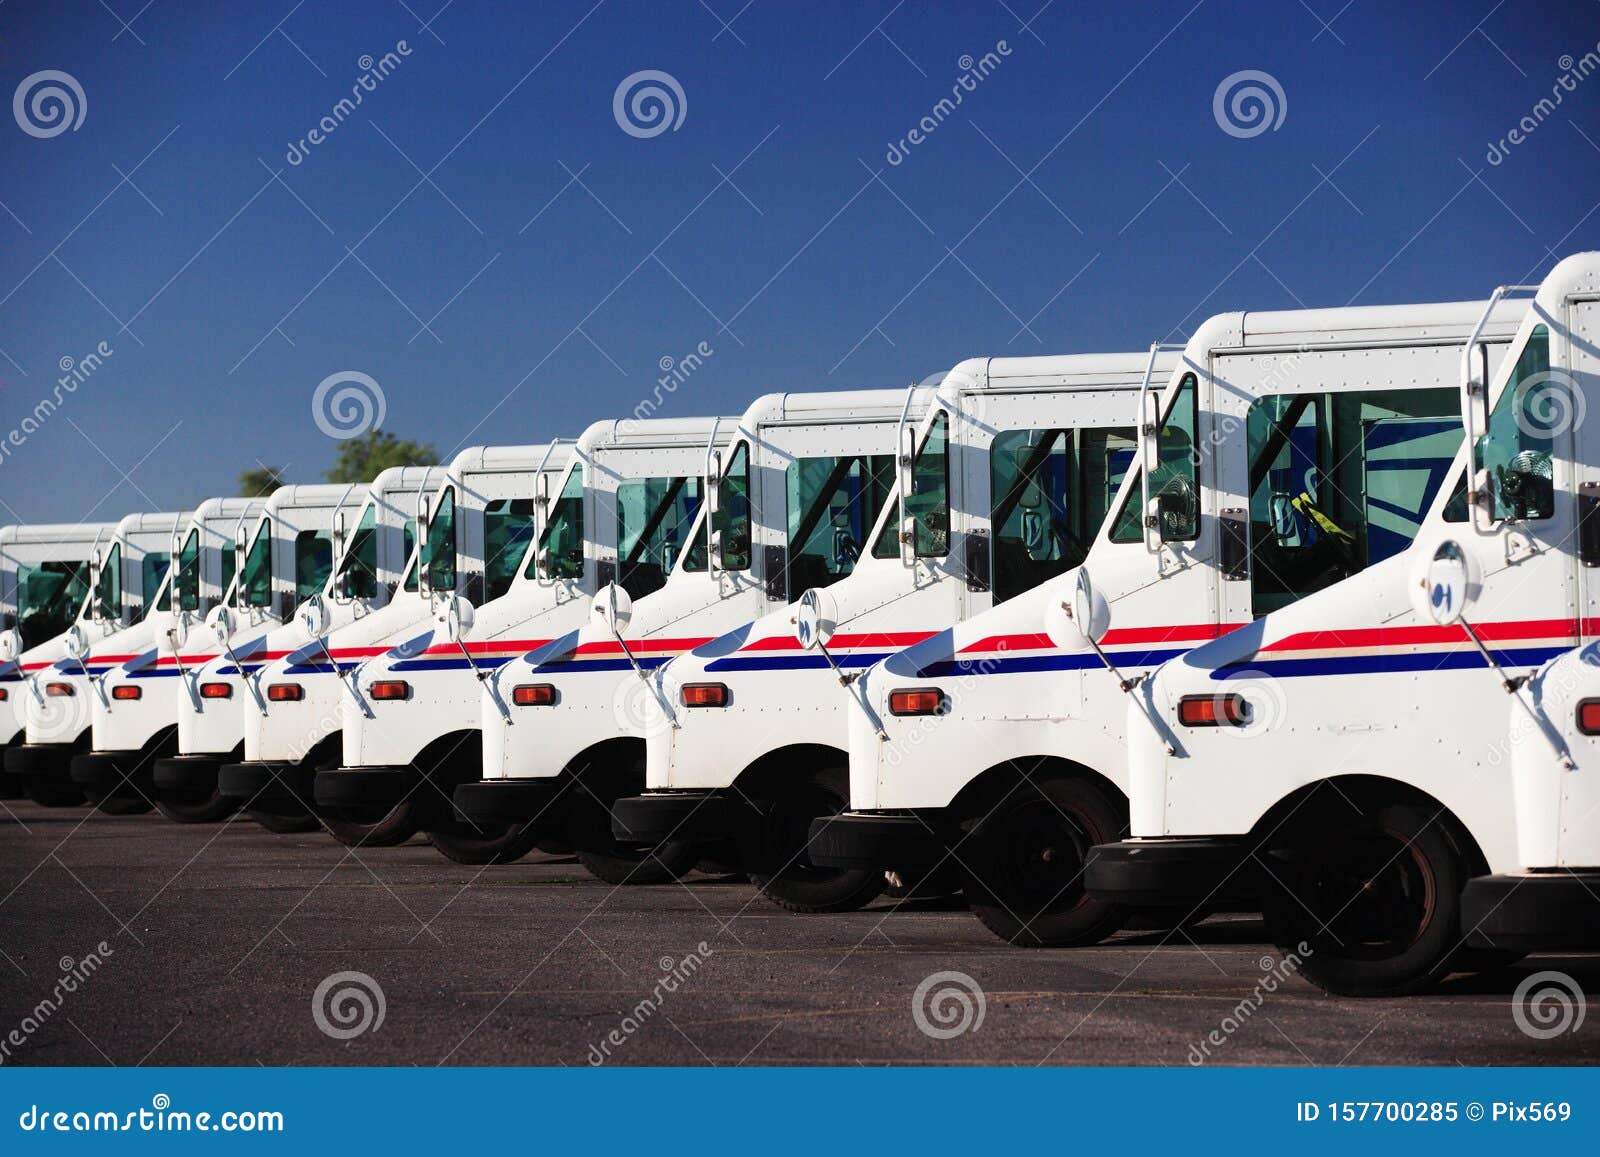 us postal service trucks parked in a line.